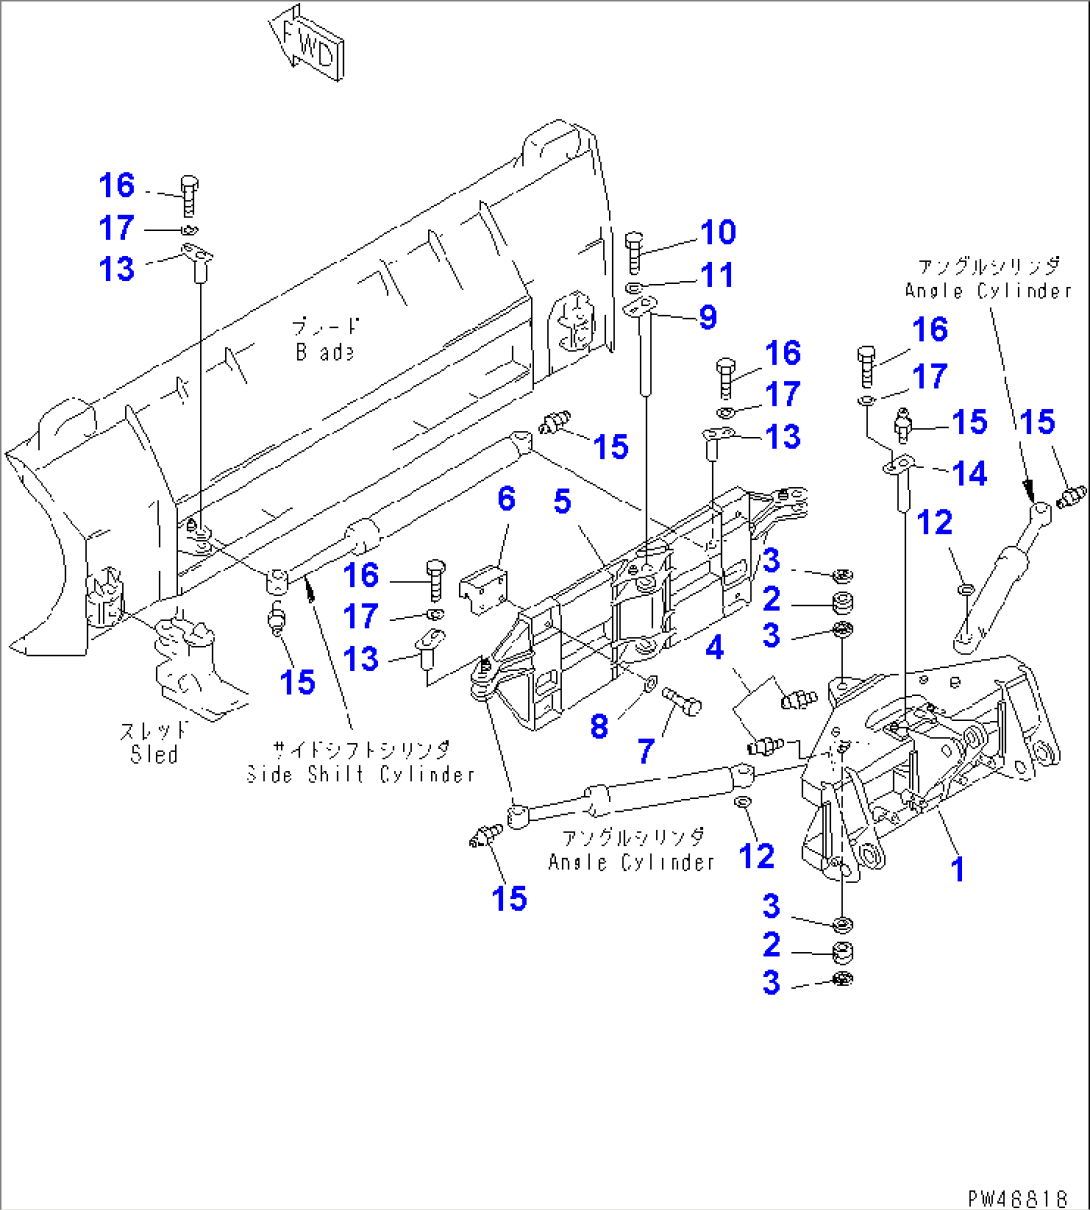 SIDE SHIFT¤ PITCH AND ANGLE SNOW PLOW (2/4) (CARRIER)(#60001-)